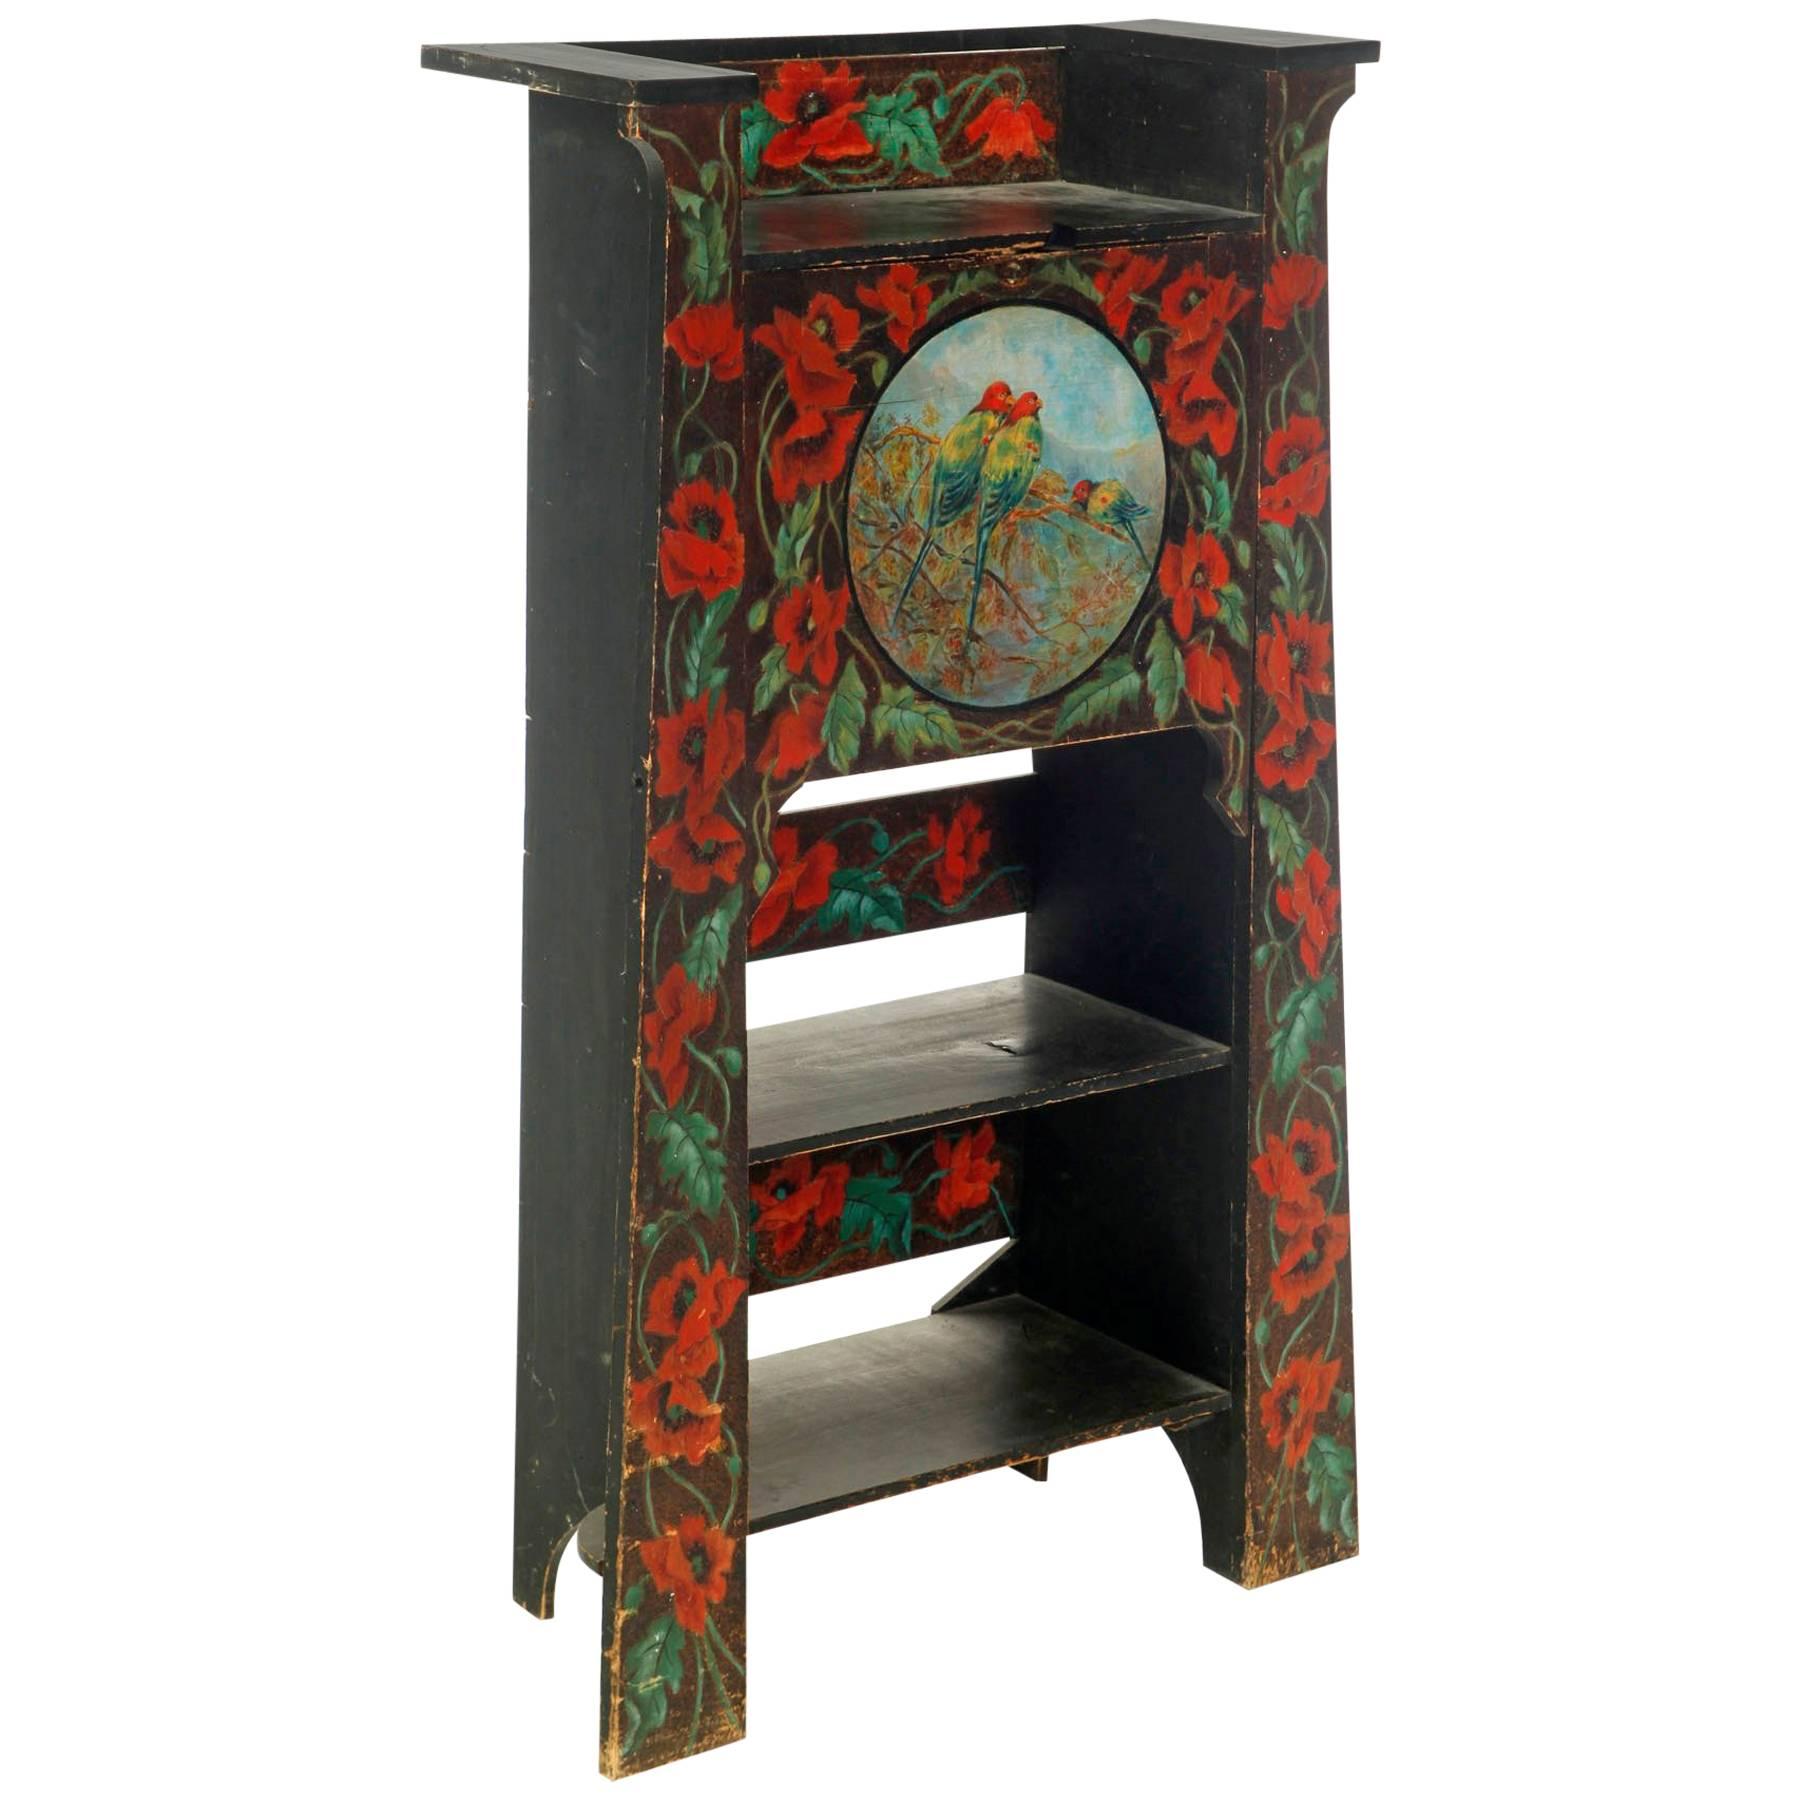 American Antique Hand-Painted  Birds and Poppies Desk